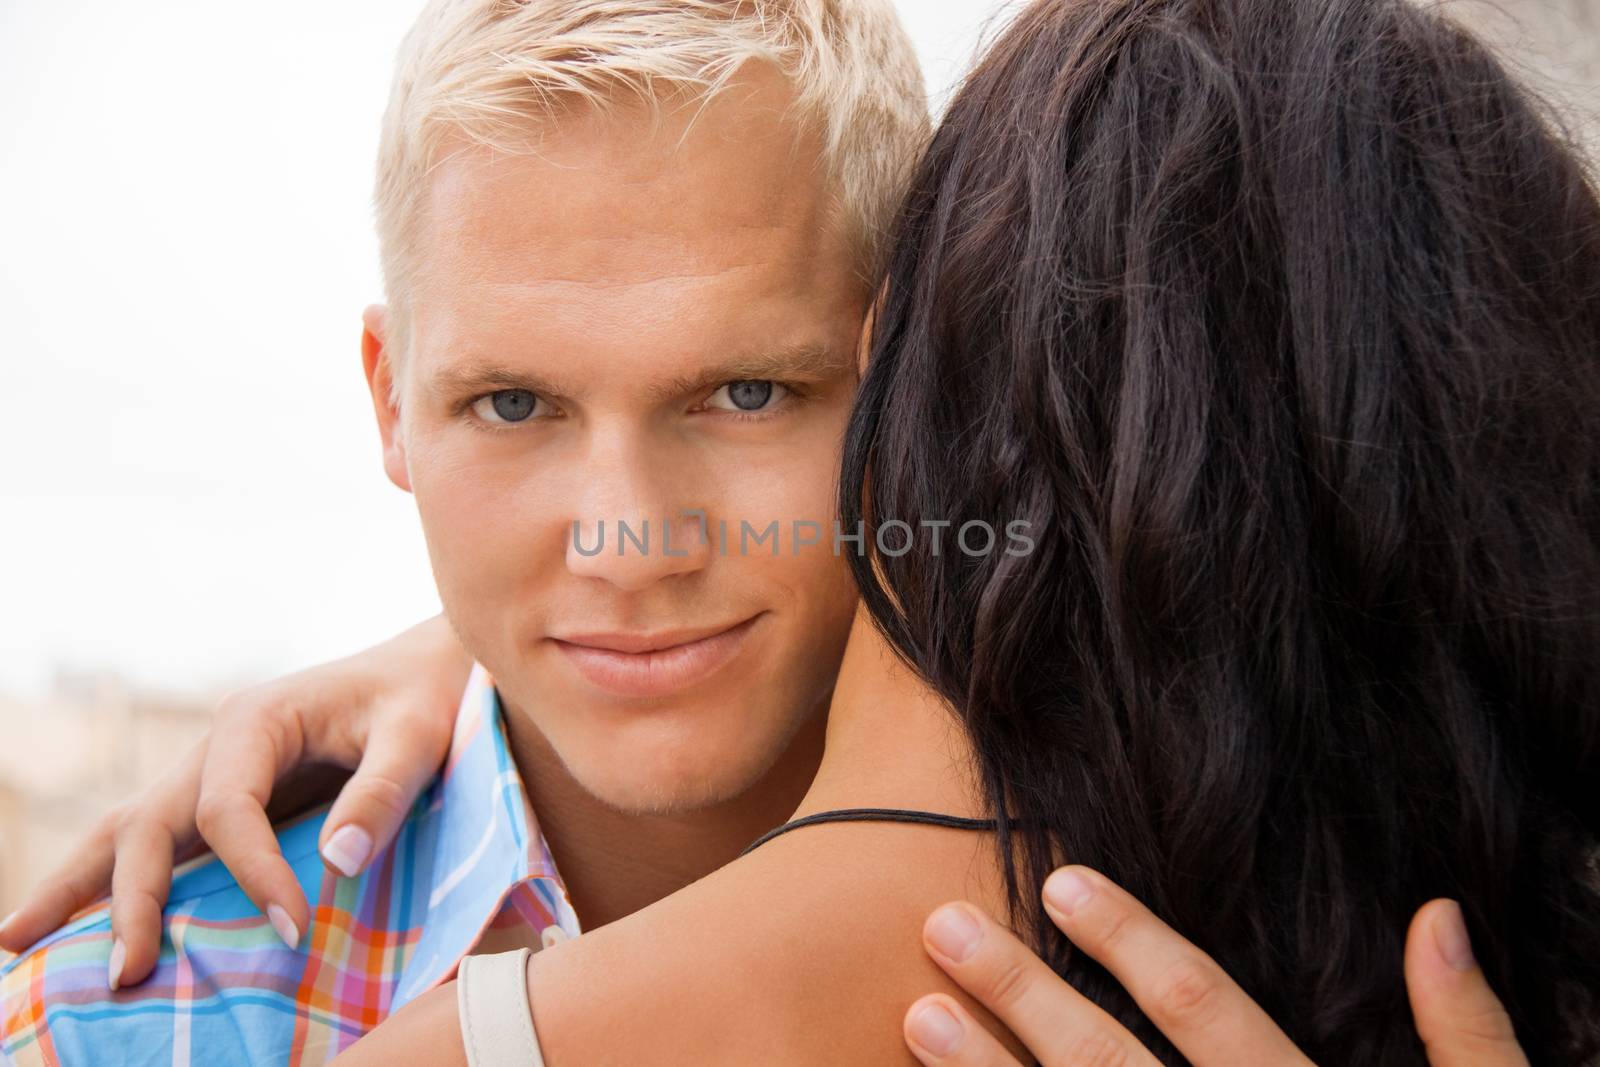 Romantic handsome young blond man hugging his girlfriend looking past the side of her head at the camera with a smile